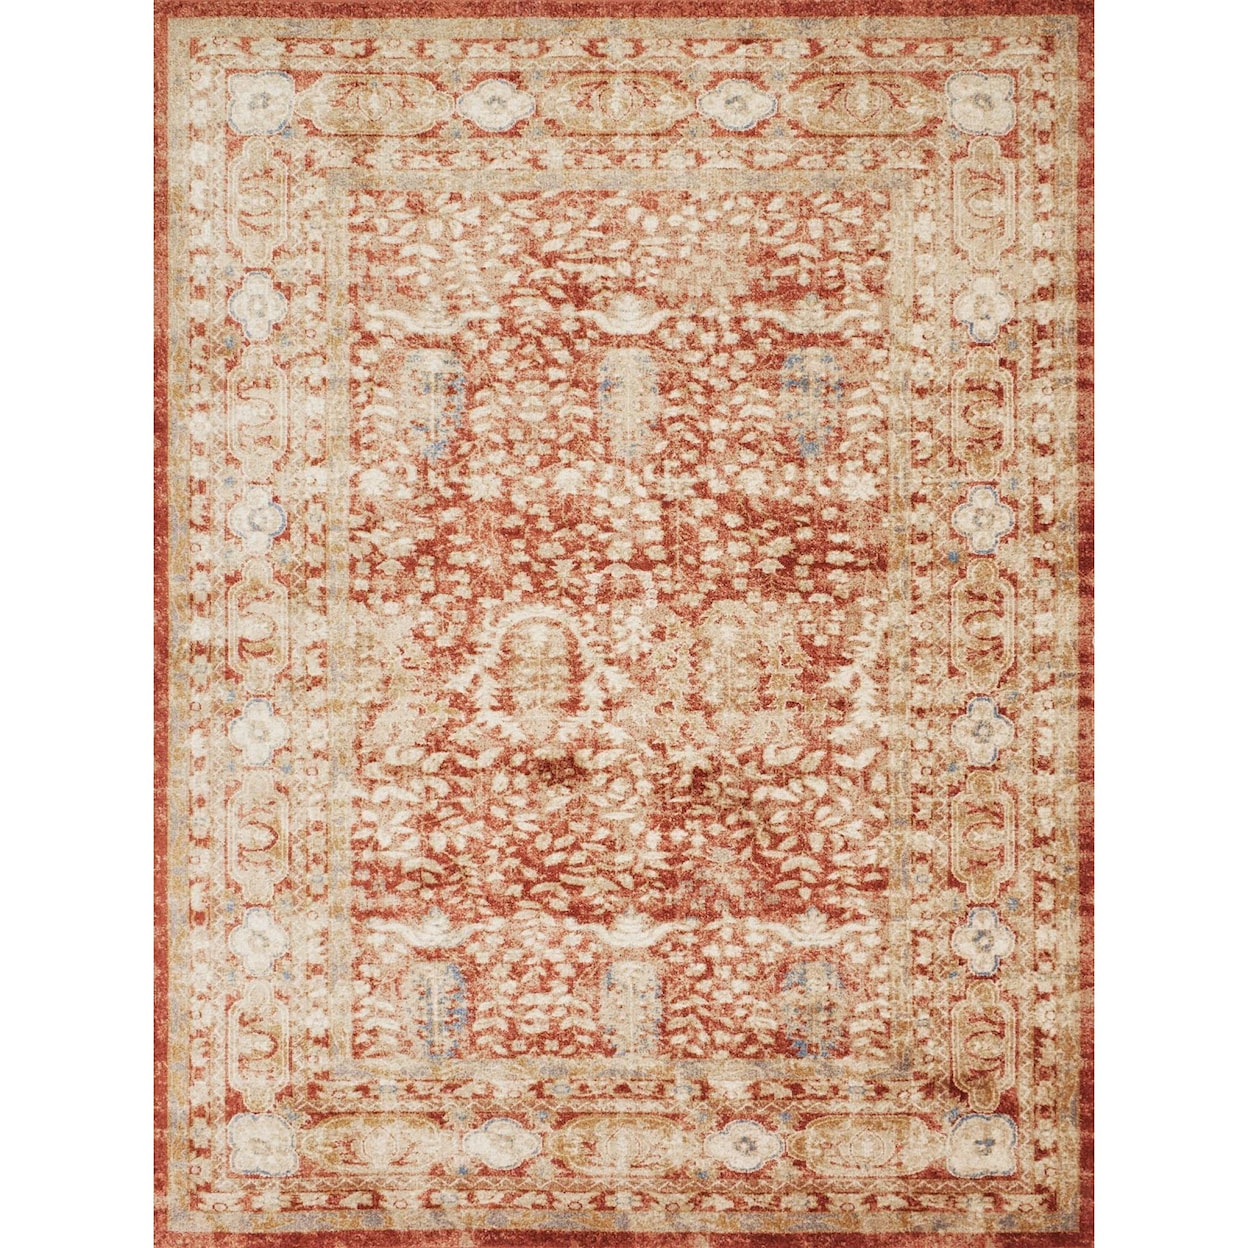 Magnolia Home by Joanna Gaines for Loloi Trinity 7' 10" x 10' 10" Rectangle Rug